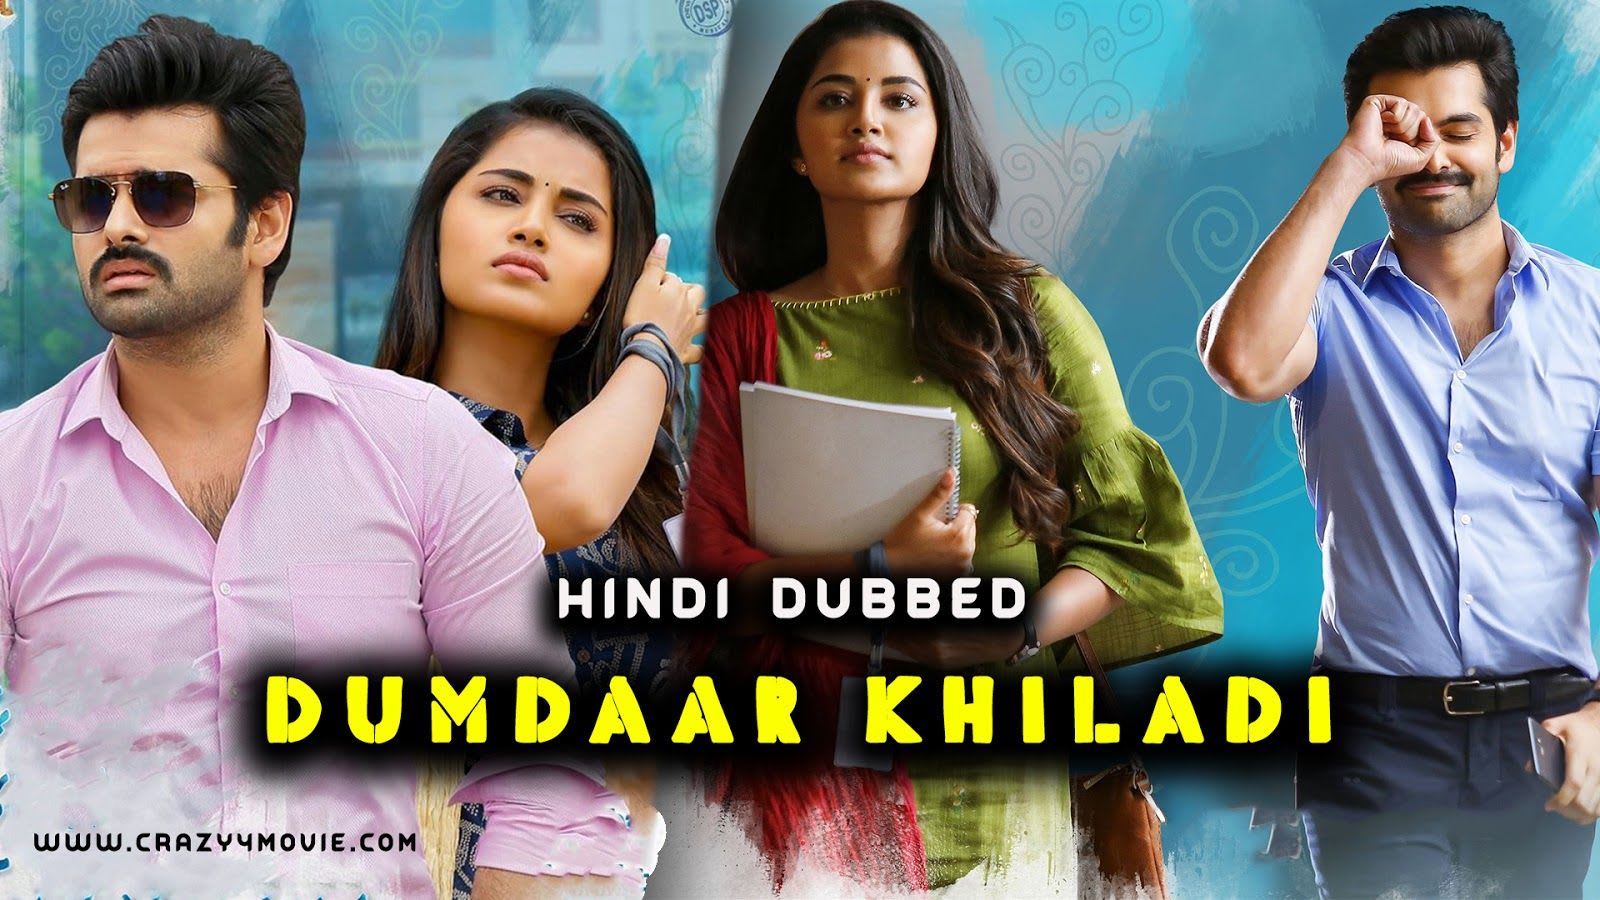 Dumdaar Khiladi Best South Indian Movies 2022 Dubbed in Hindi available on Hotstar to watch.